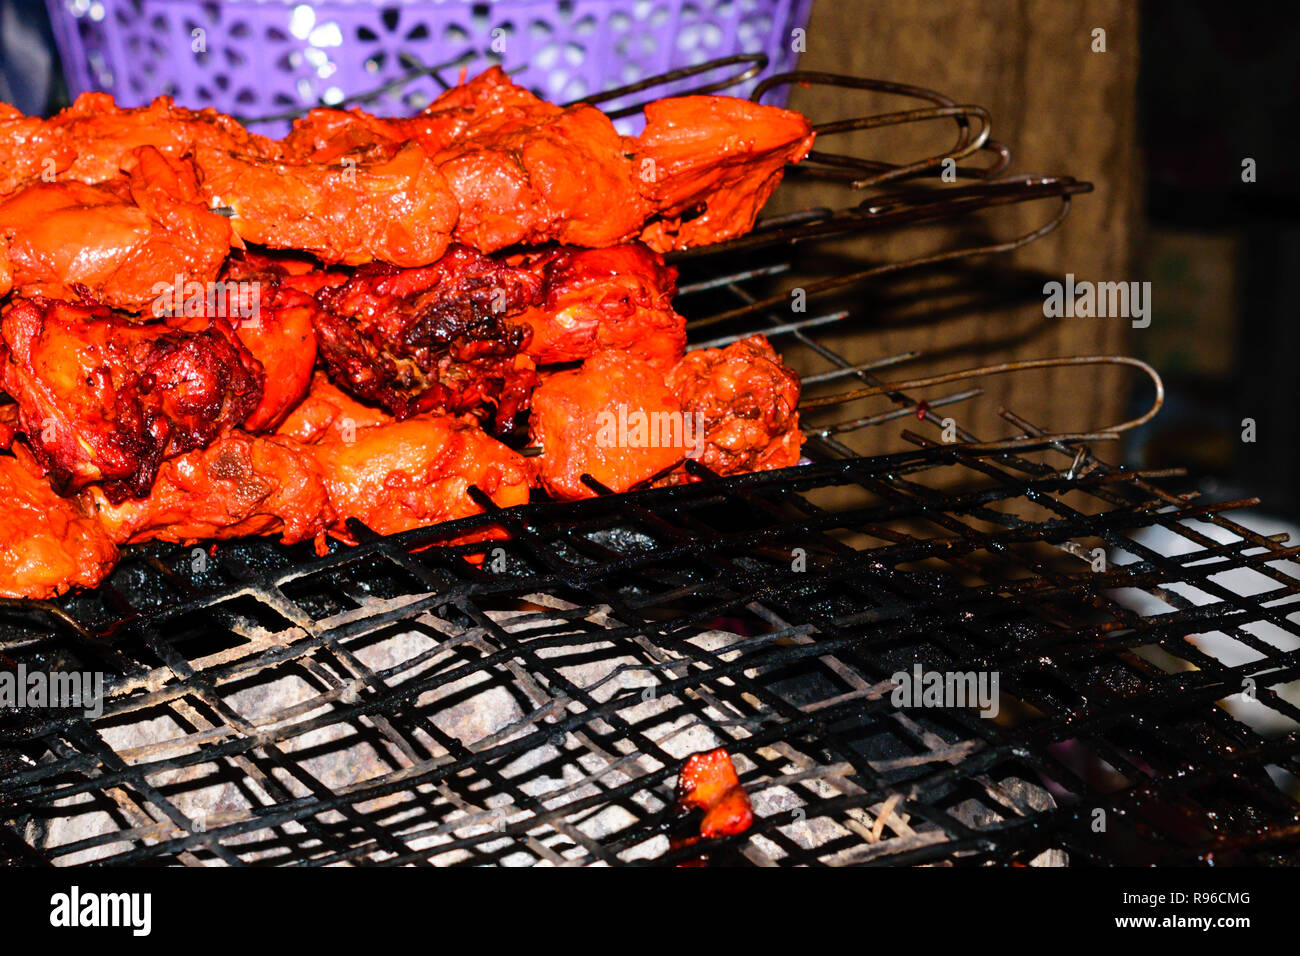 Shish kebab preparation on barbecue grill over charcoal. Roast ...